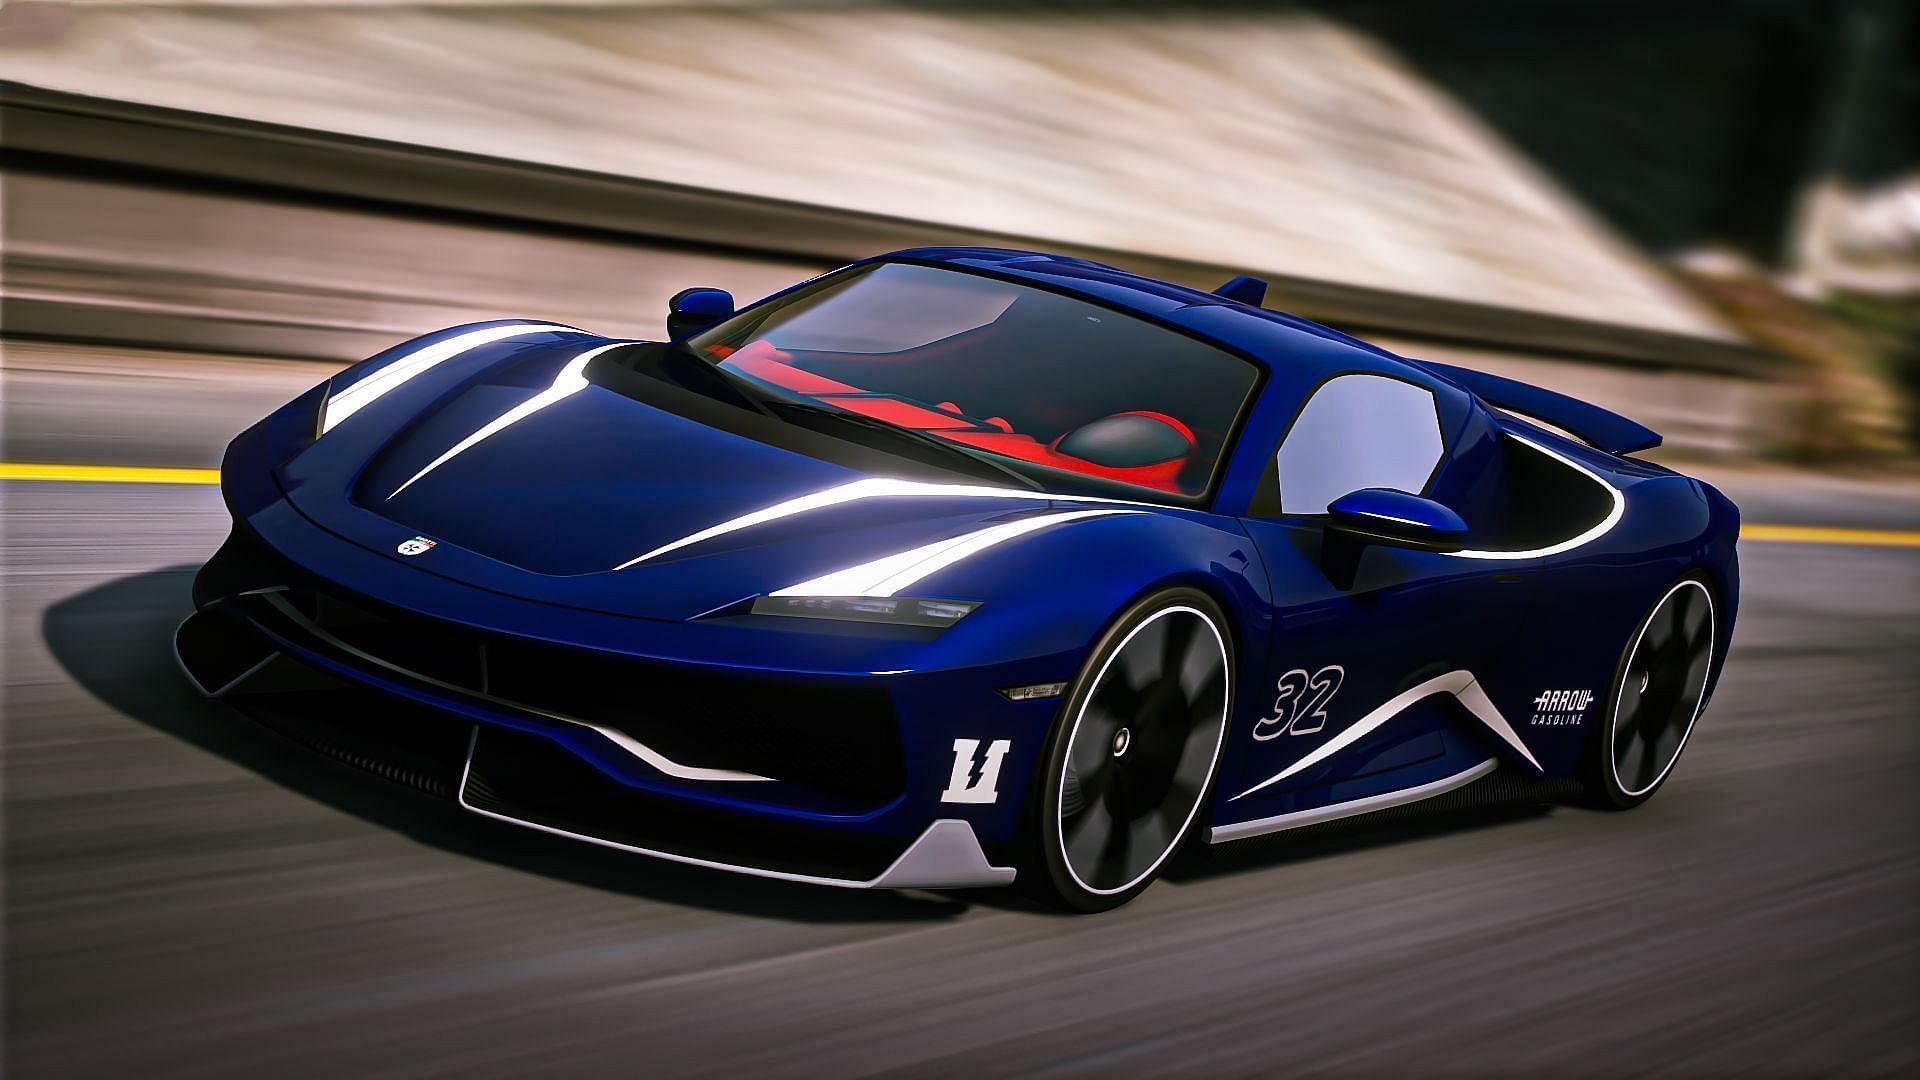 5 fastest sports cars to own in GTA Online, ranked